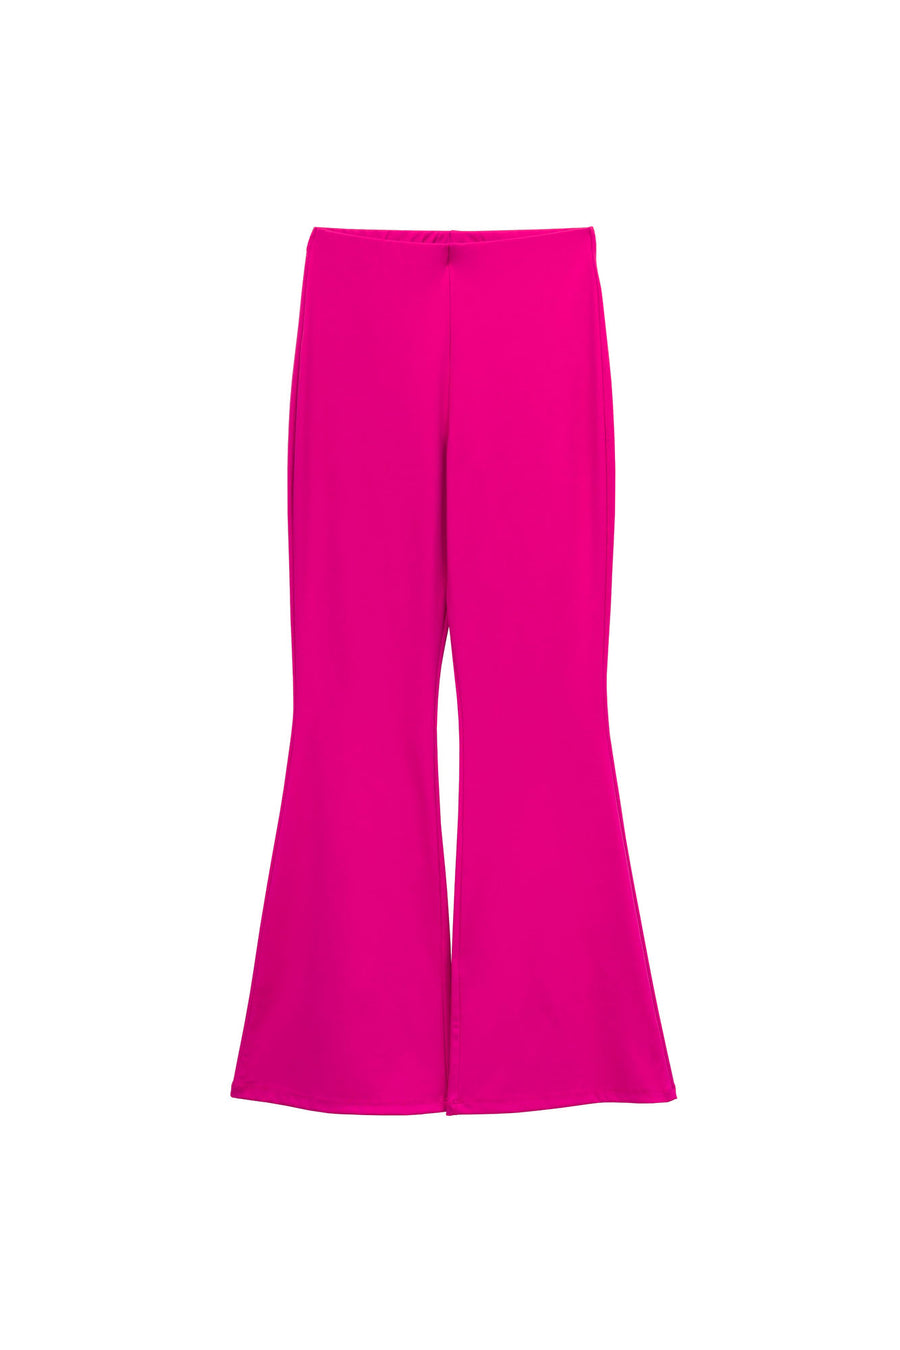 #29 THE FLARED PANTS PINK